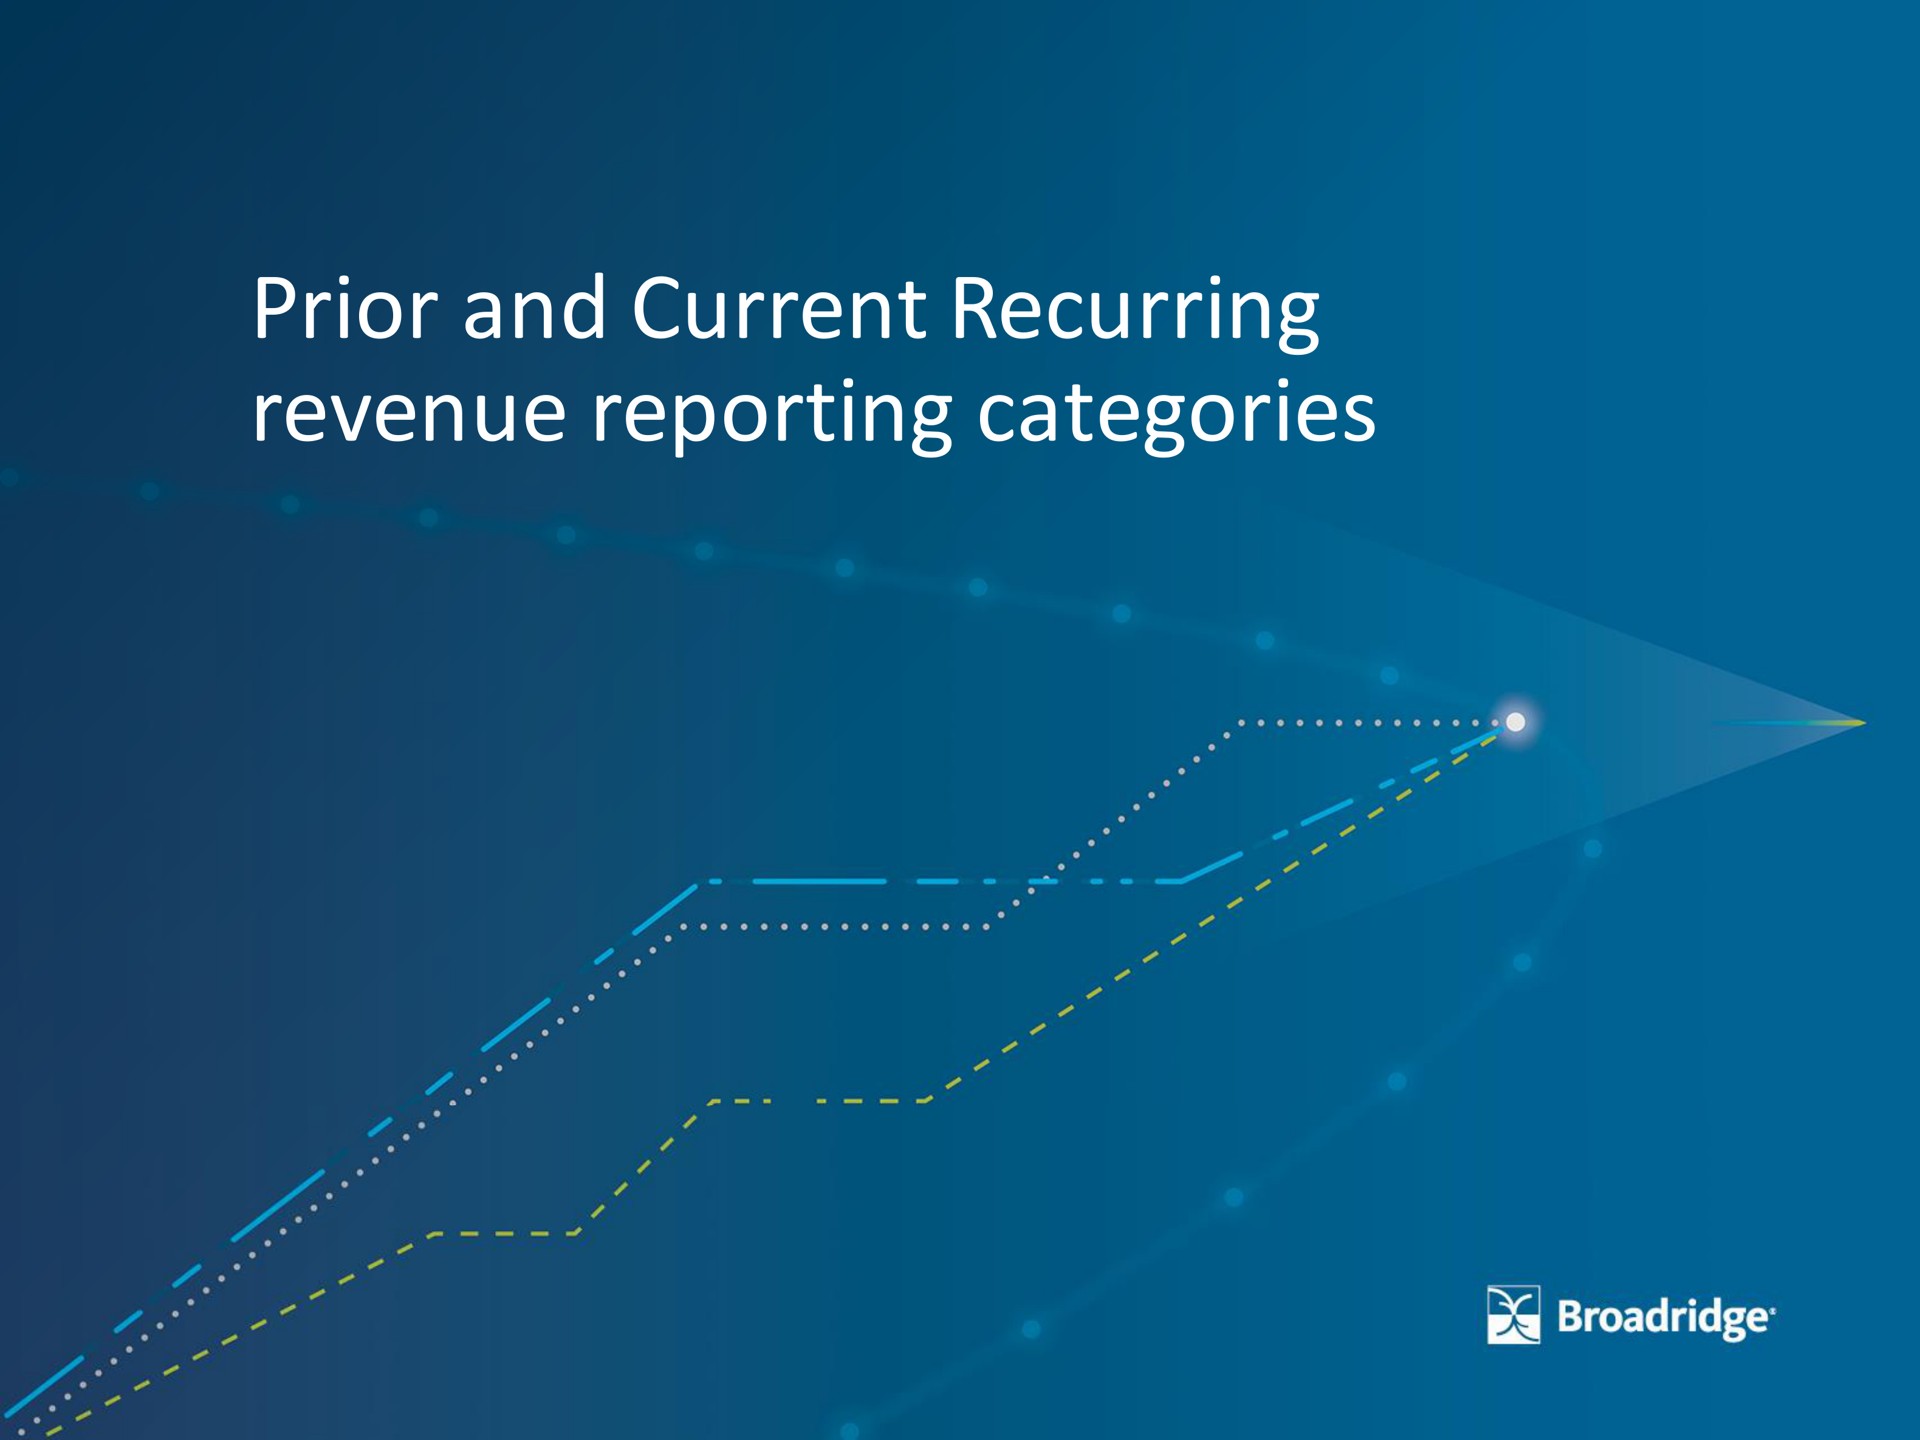 prior and current recurring revenue reporting categories | Broadridge Financial Solutions